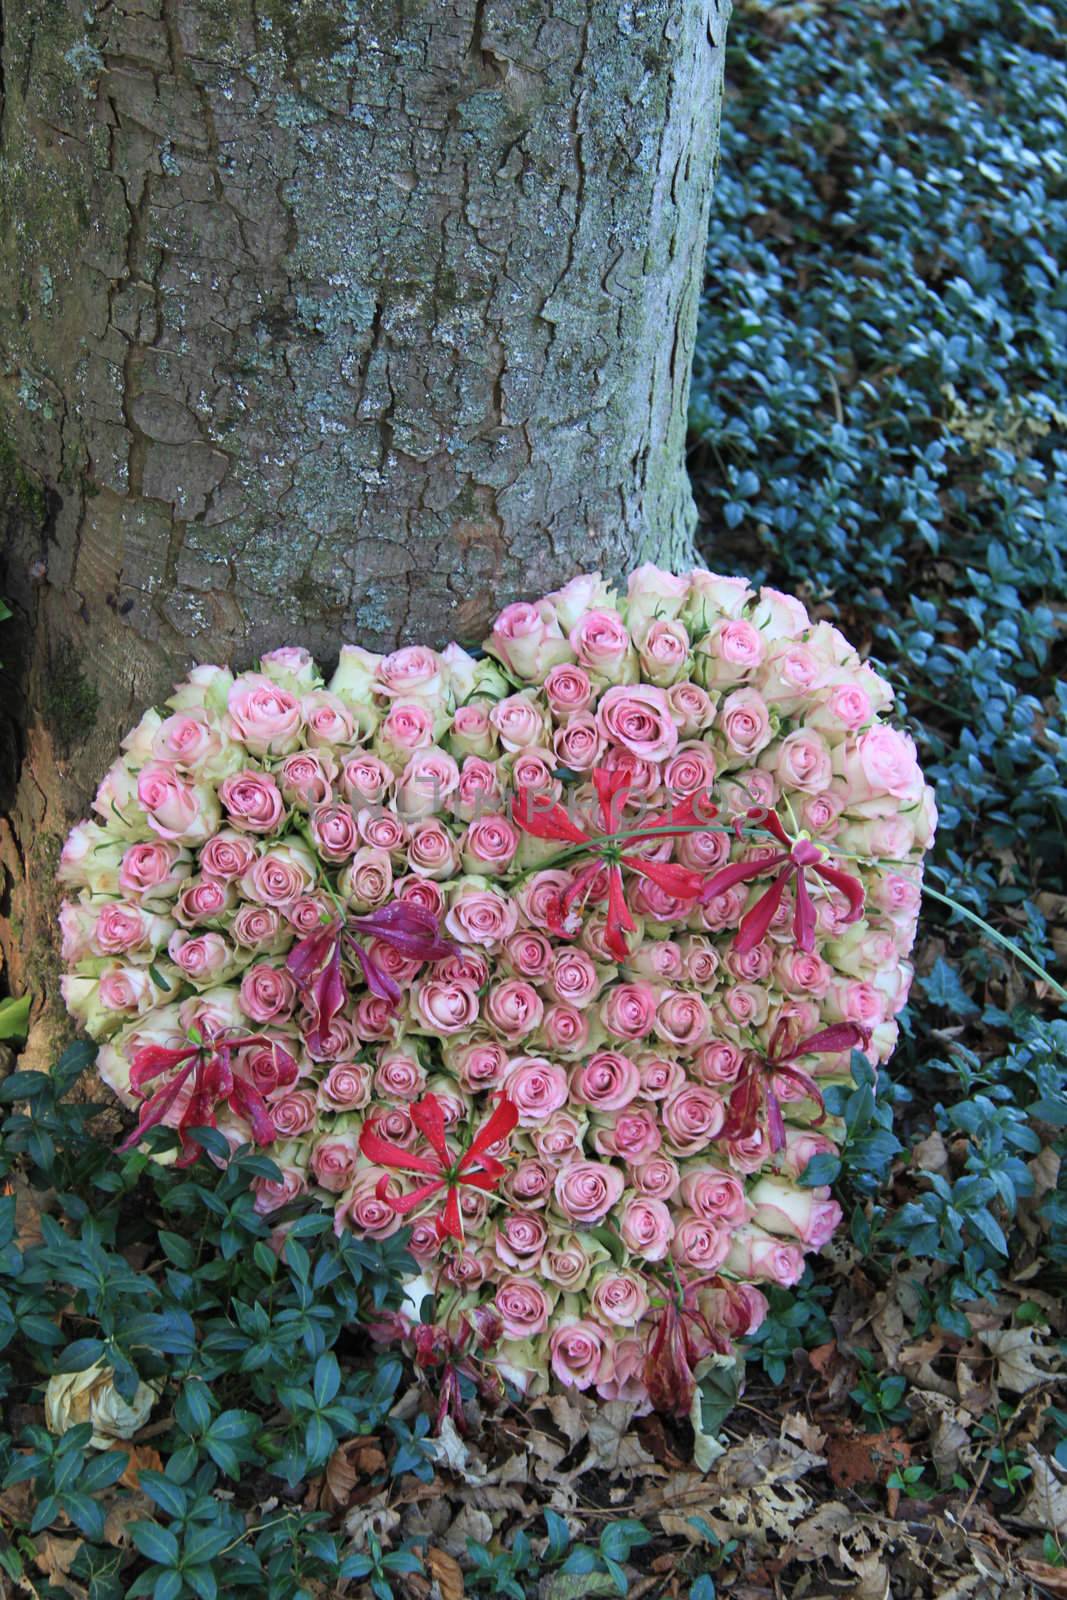 Heart shaped sympathy flower arrangement with pink roses